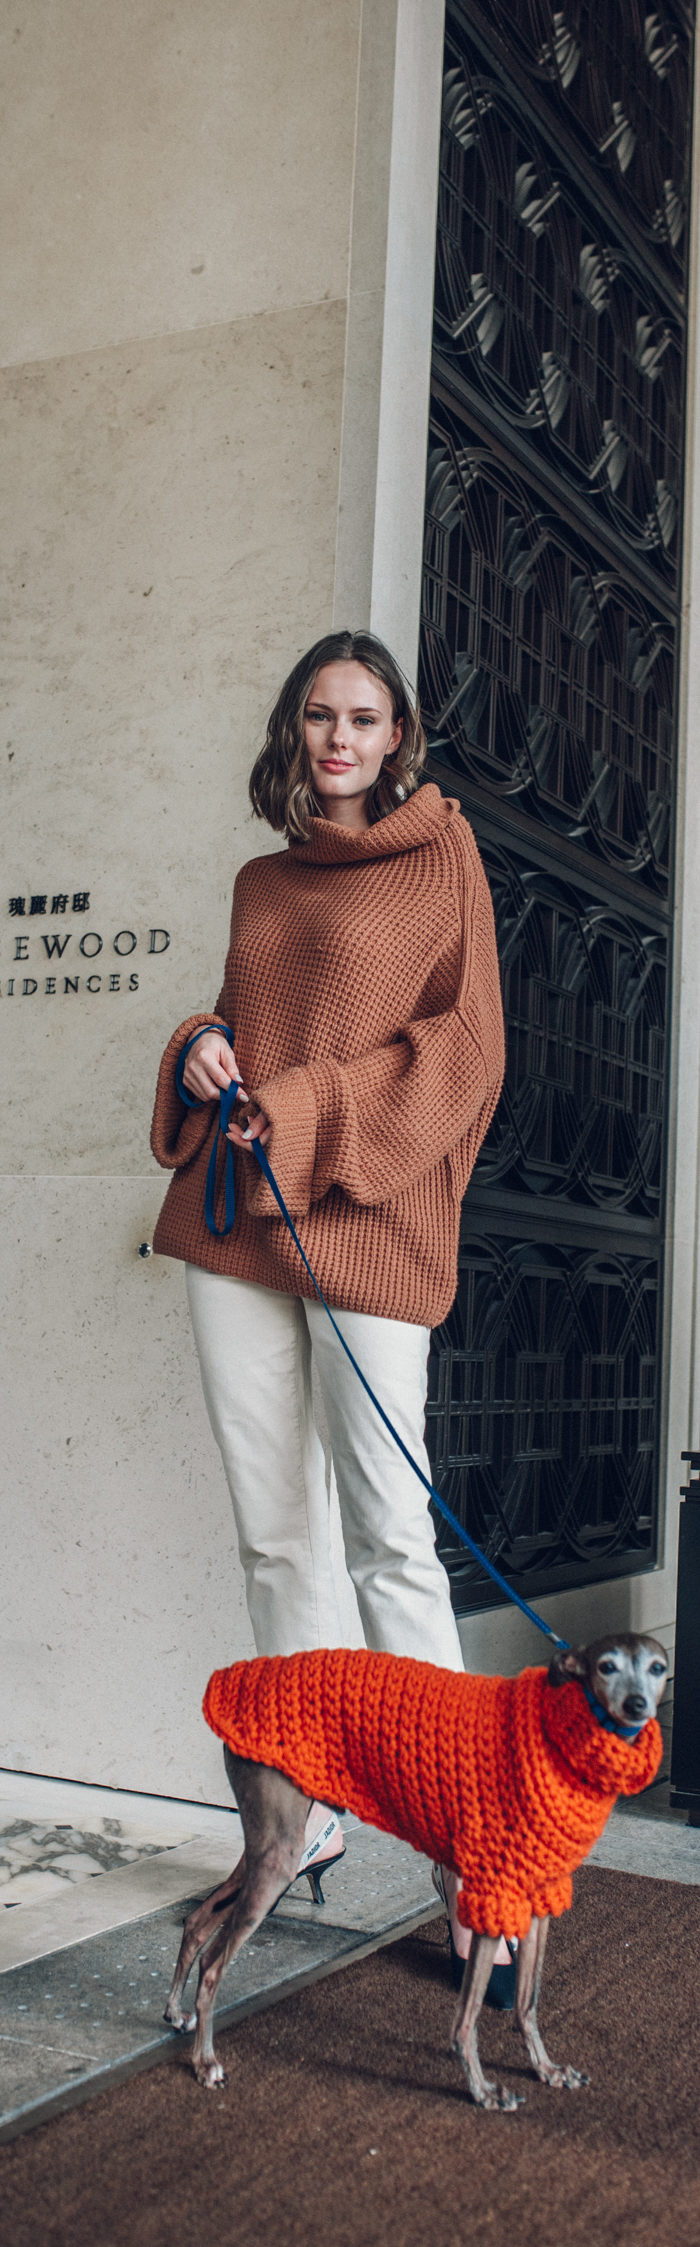 Miss USA 2011 Alyssa Campanella of The A List blog visits Rosewood Hong Kong residences in Tsim Sha Tsui wearing Free People oversized sweater, Paige Hoxton jeans, and Dior slingback heels